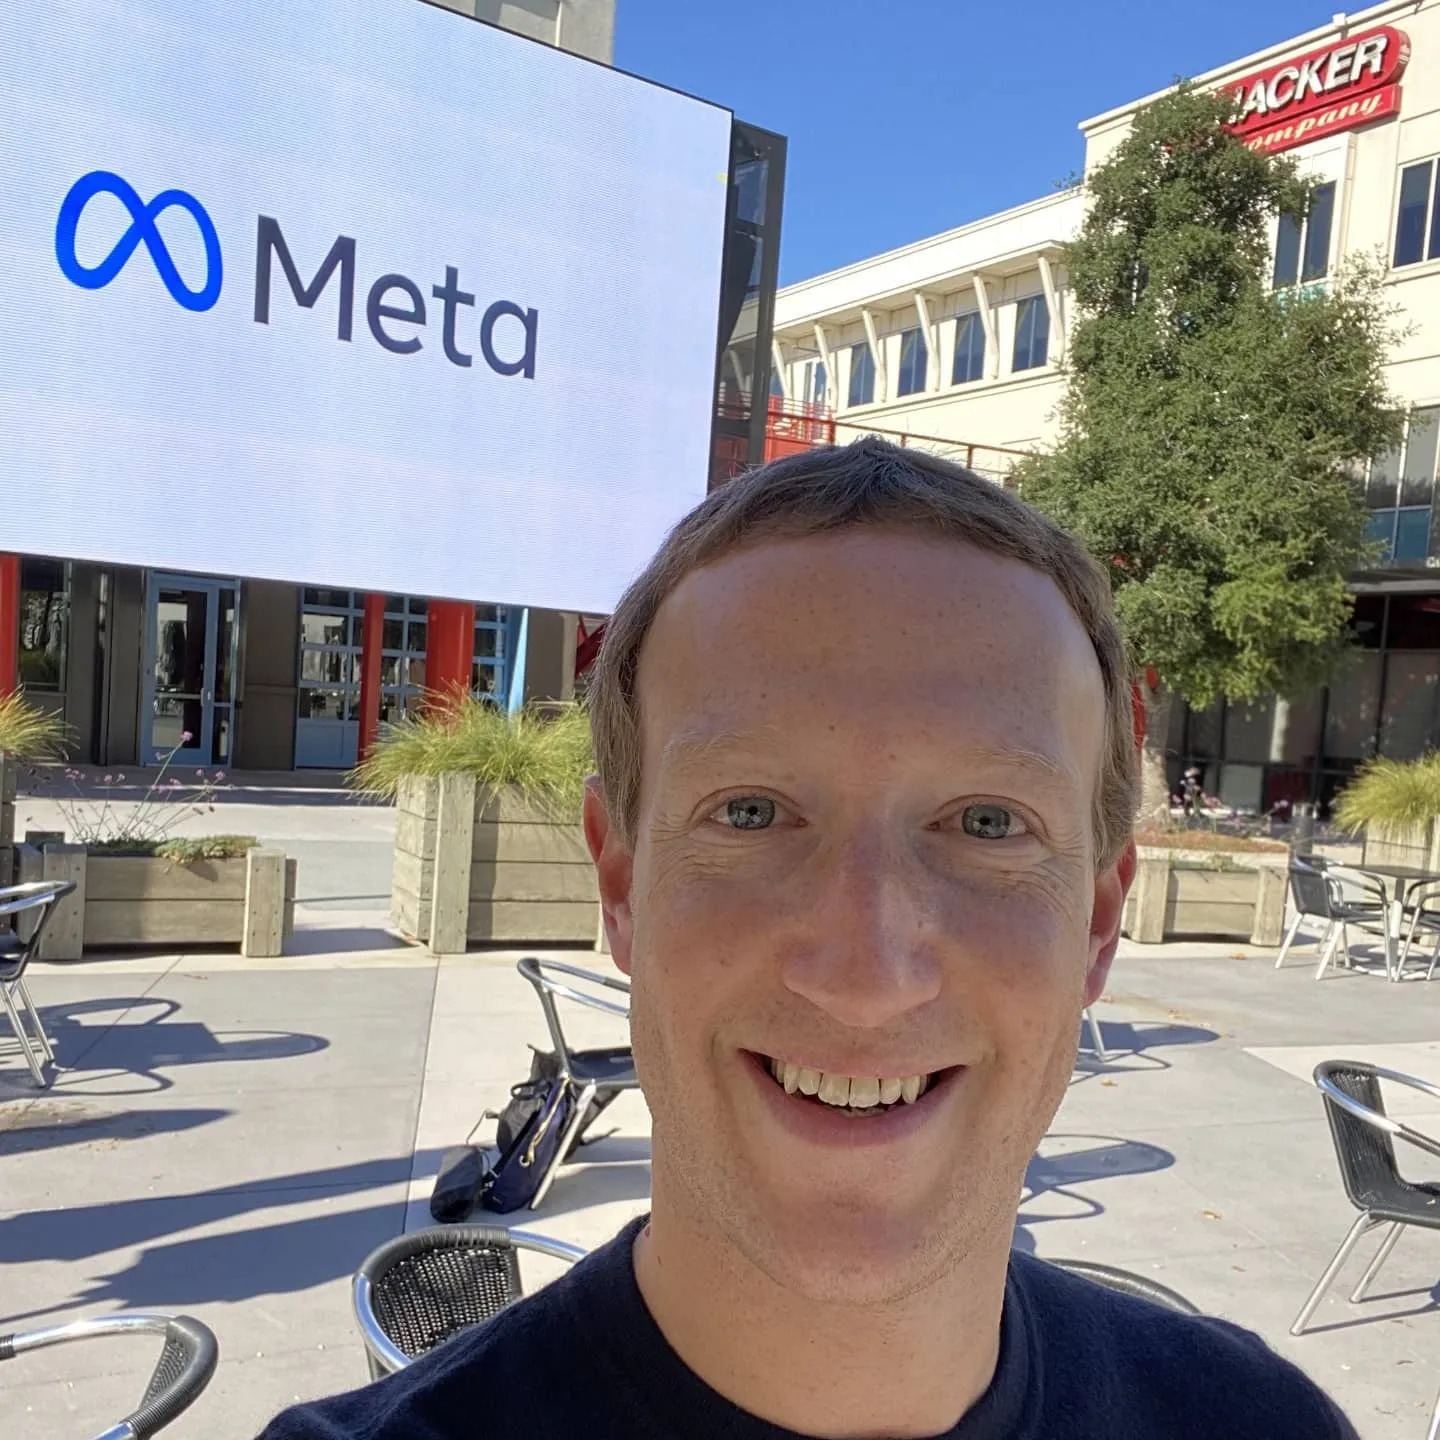 Mark Zuckerberg takes a selfie outdoors, with back from a Meta billboard sign